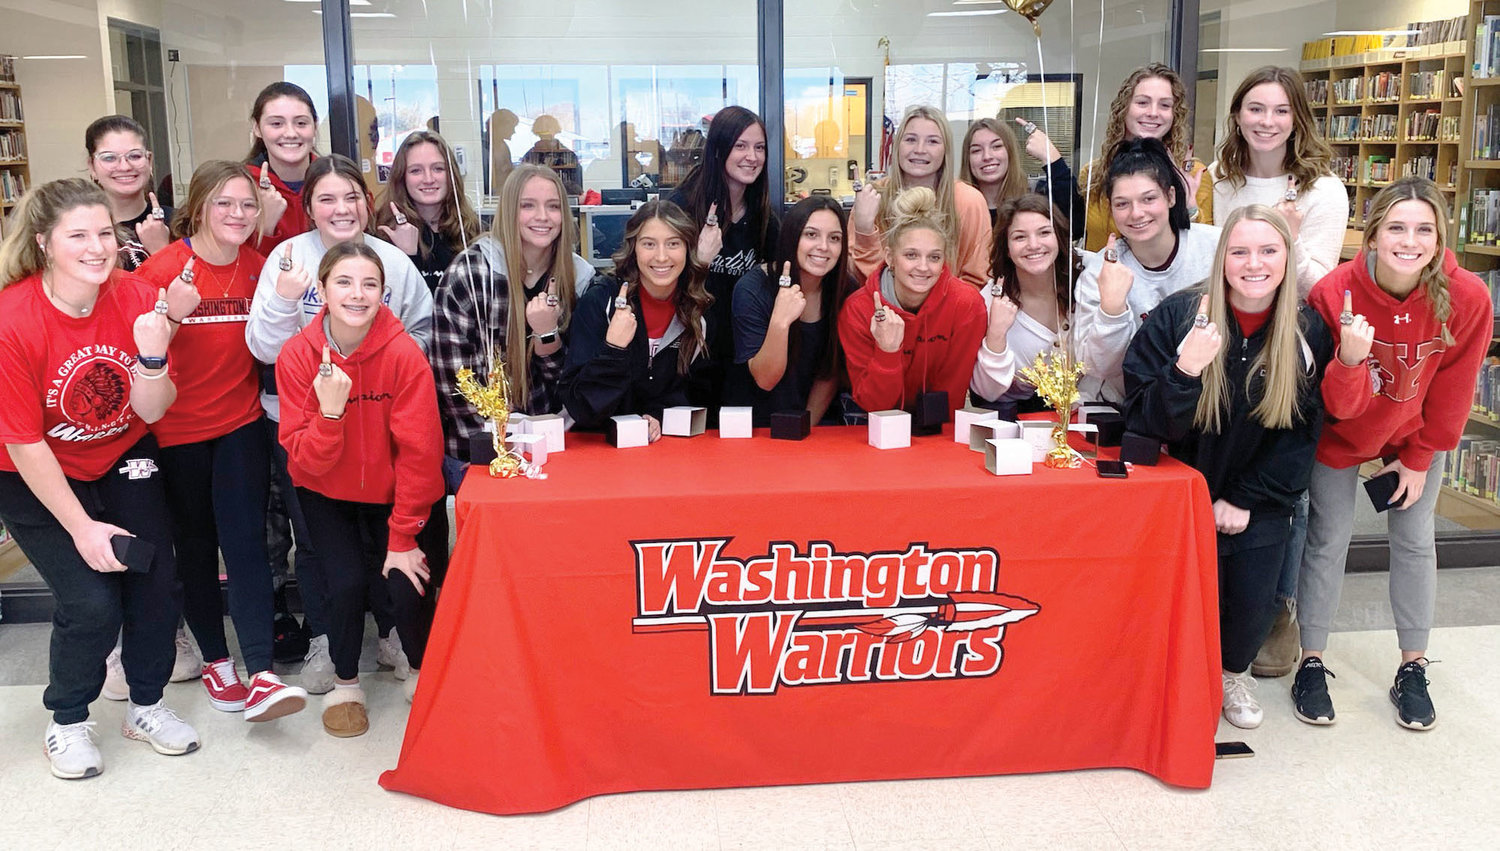 Washington’s Lady Warriors got their State Championship rings during a ceremony at the high school Tuesday.